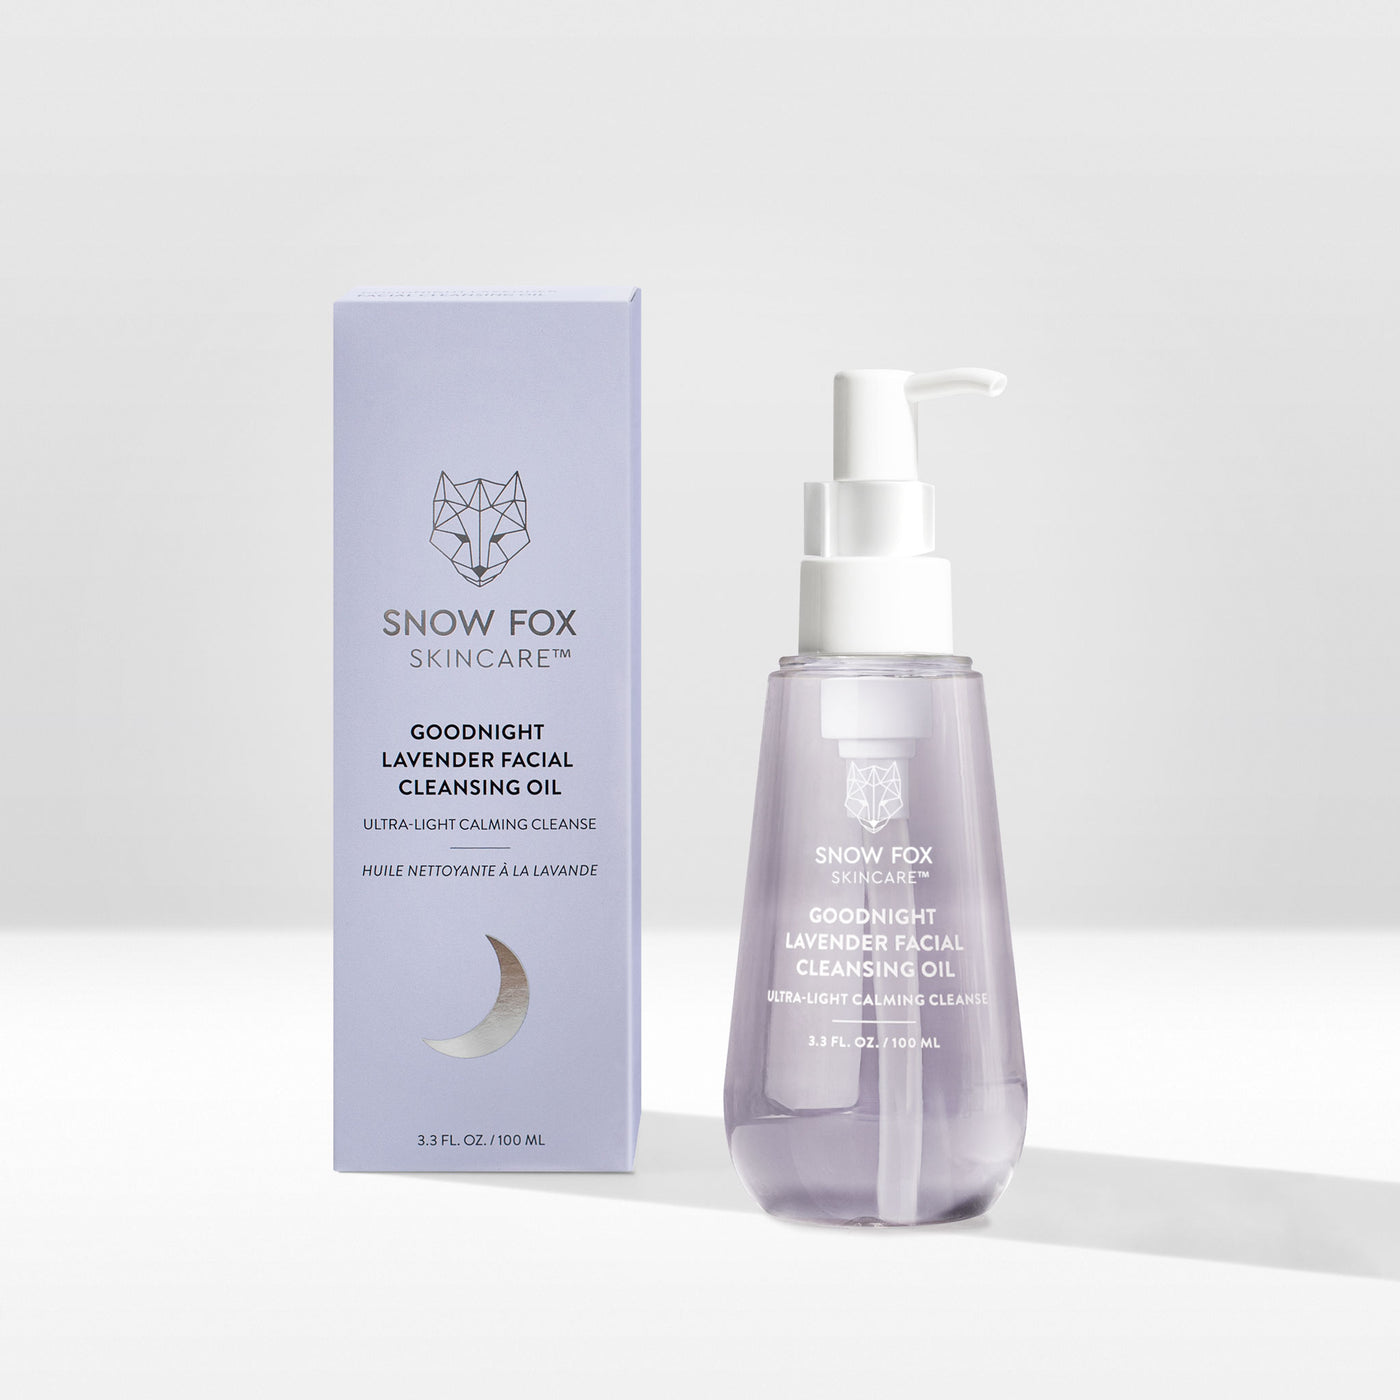 A comforting, barrier supporting facial cleansing oil that washes off both make up and dirt without stripping skin barriers